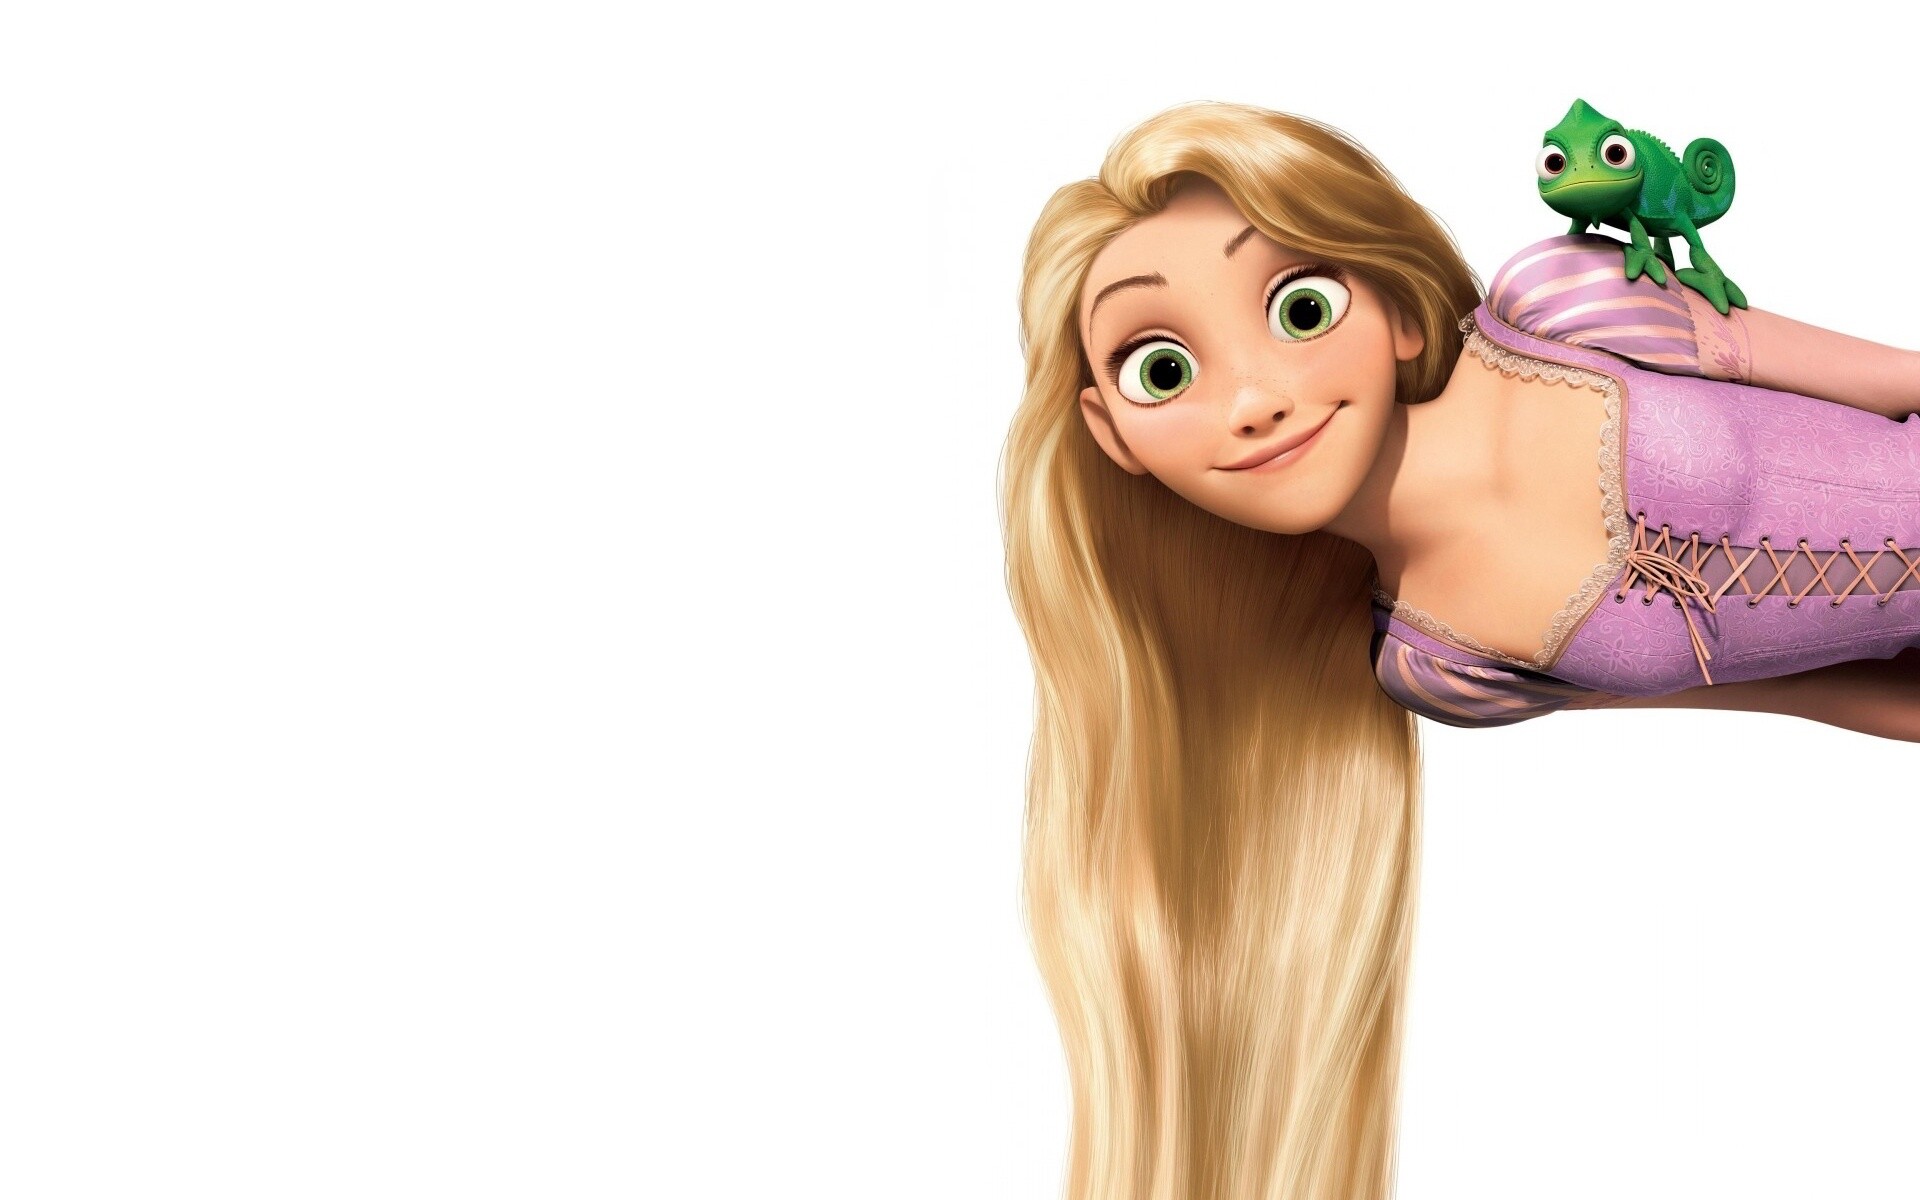 Tangled: Disney's characters, Pascal, Rapunzel's pet chameleon, with the ability to change colors. 1920x1200 HD Background.